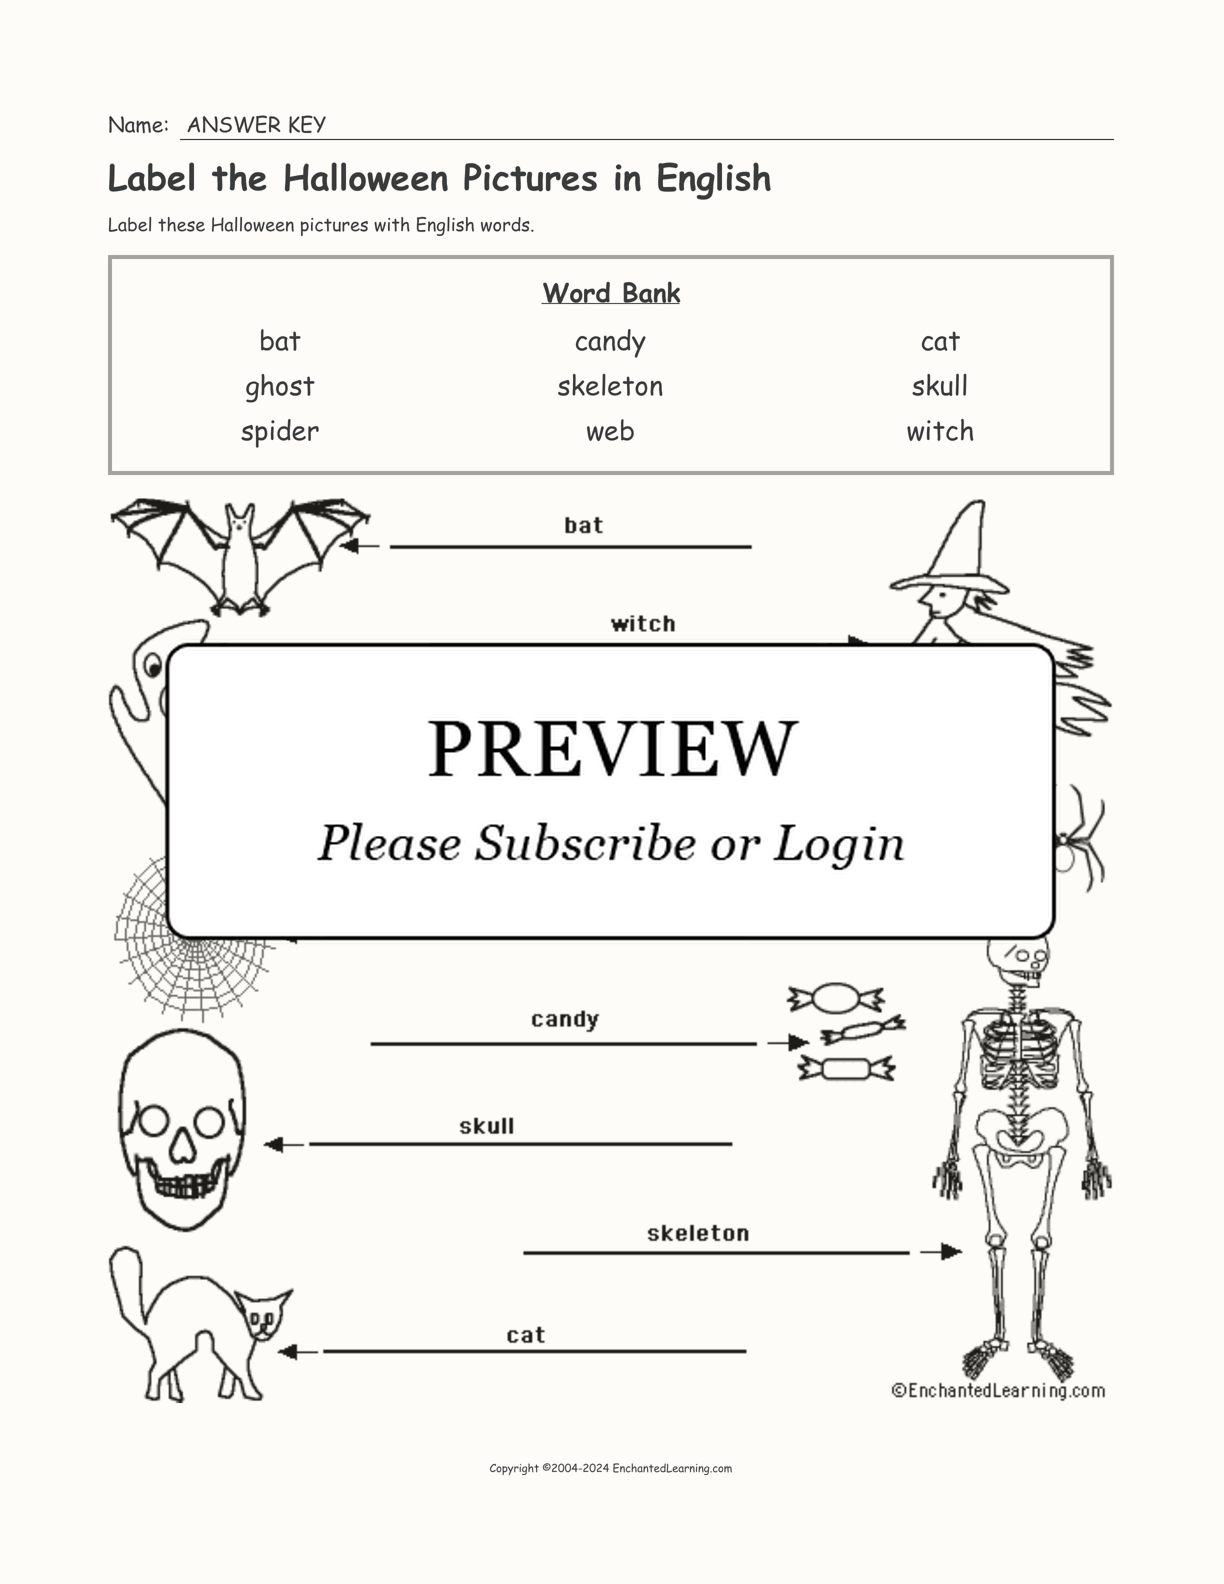 Label the Halloween Pictures in English interactive worksheet page 2